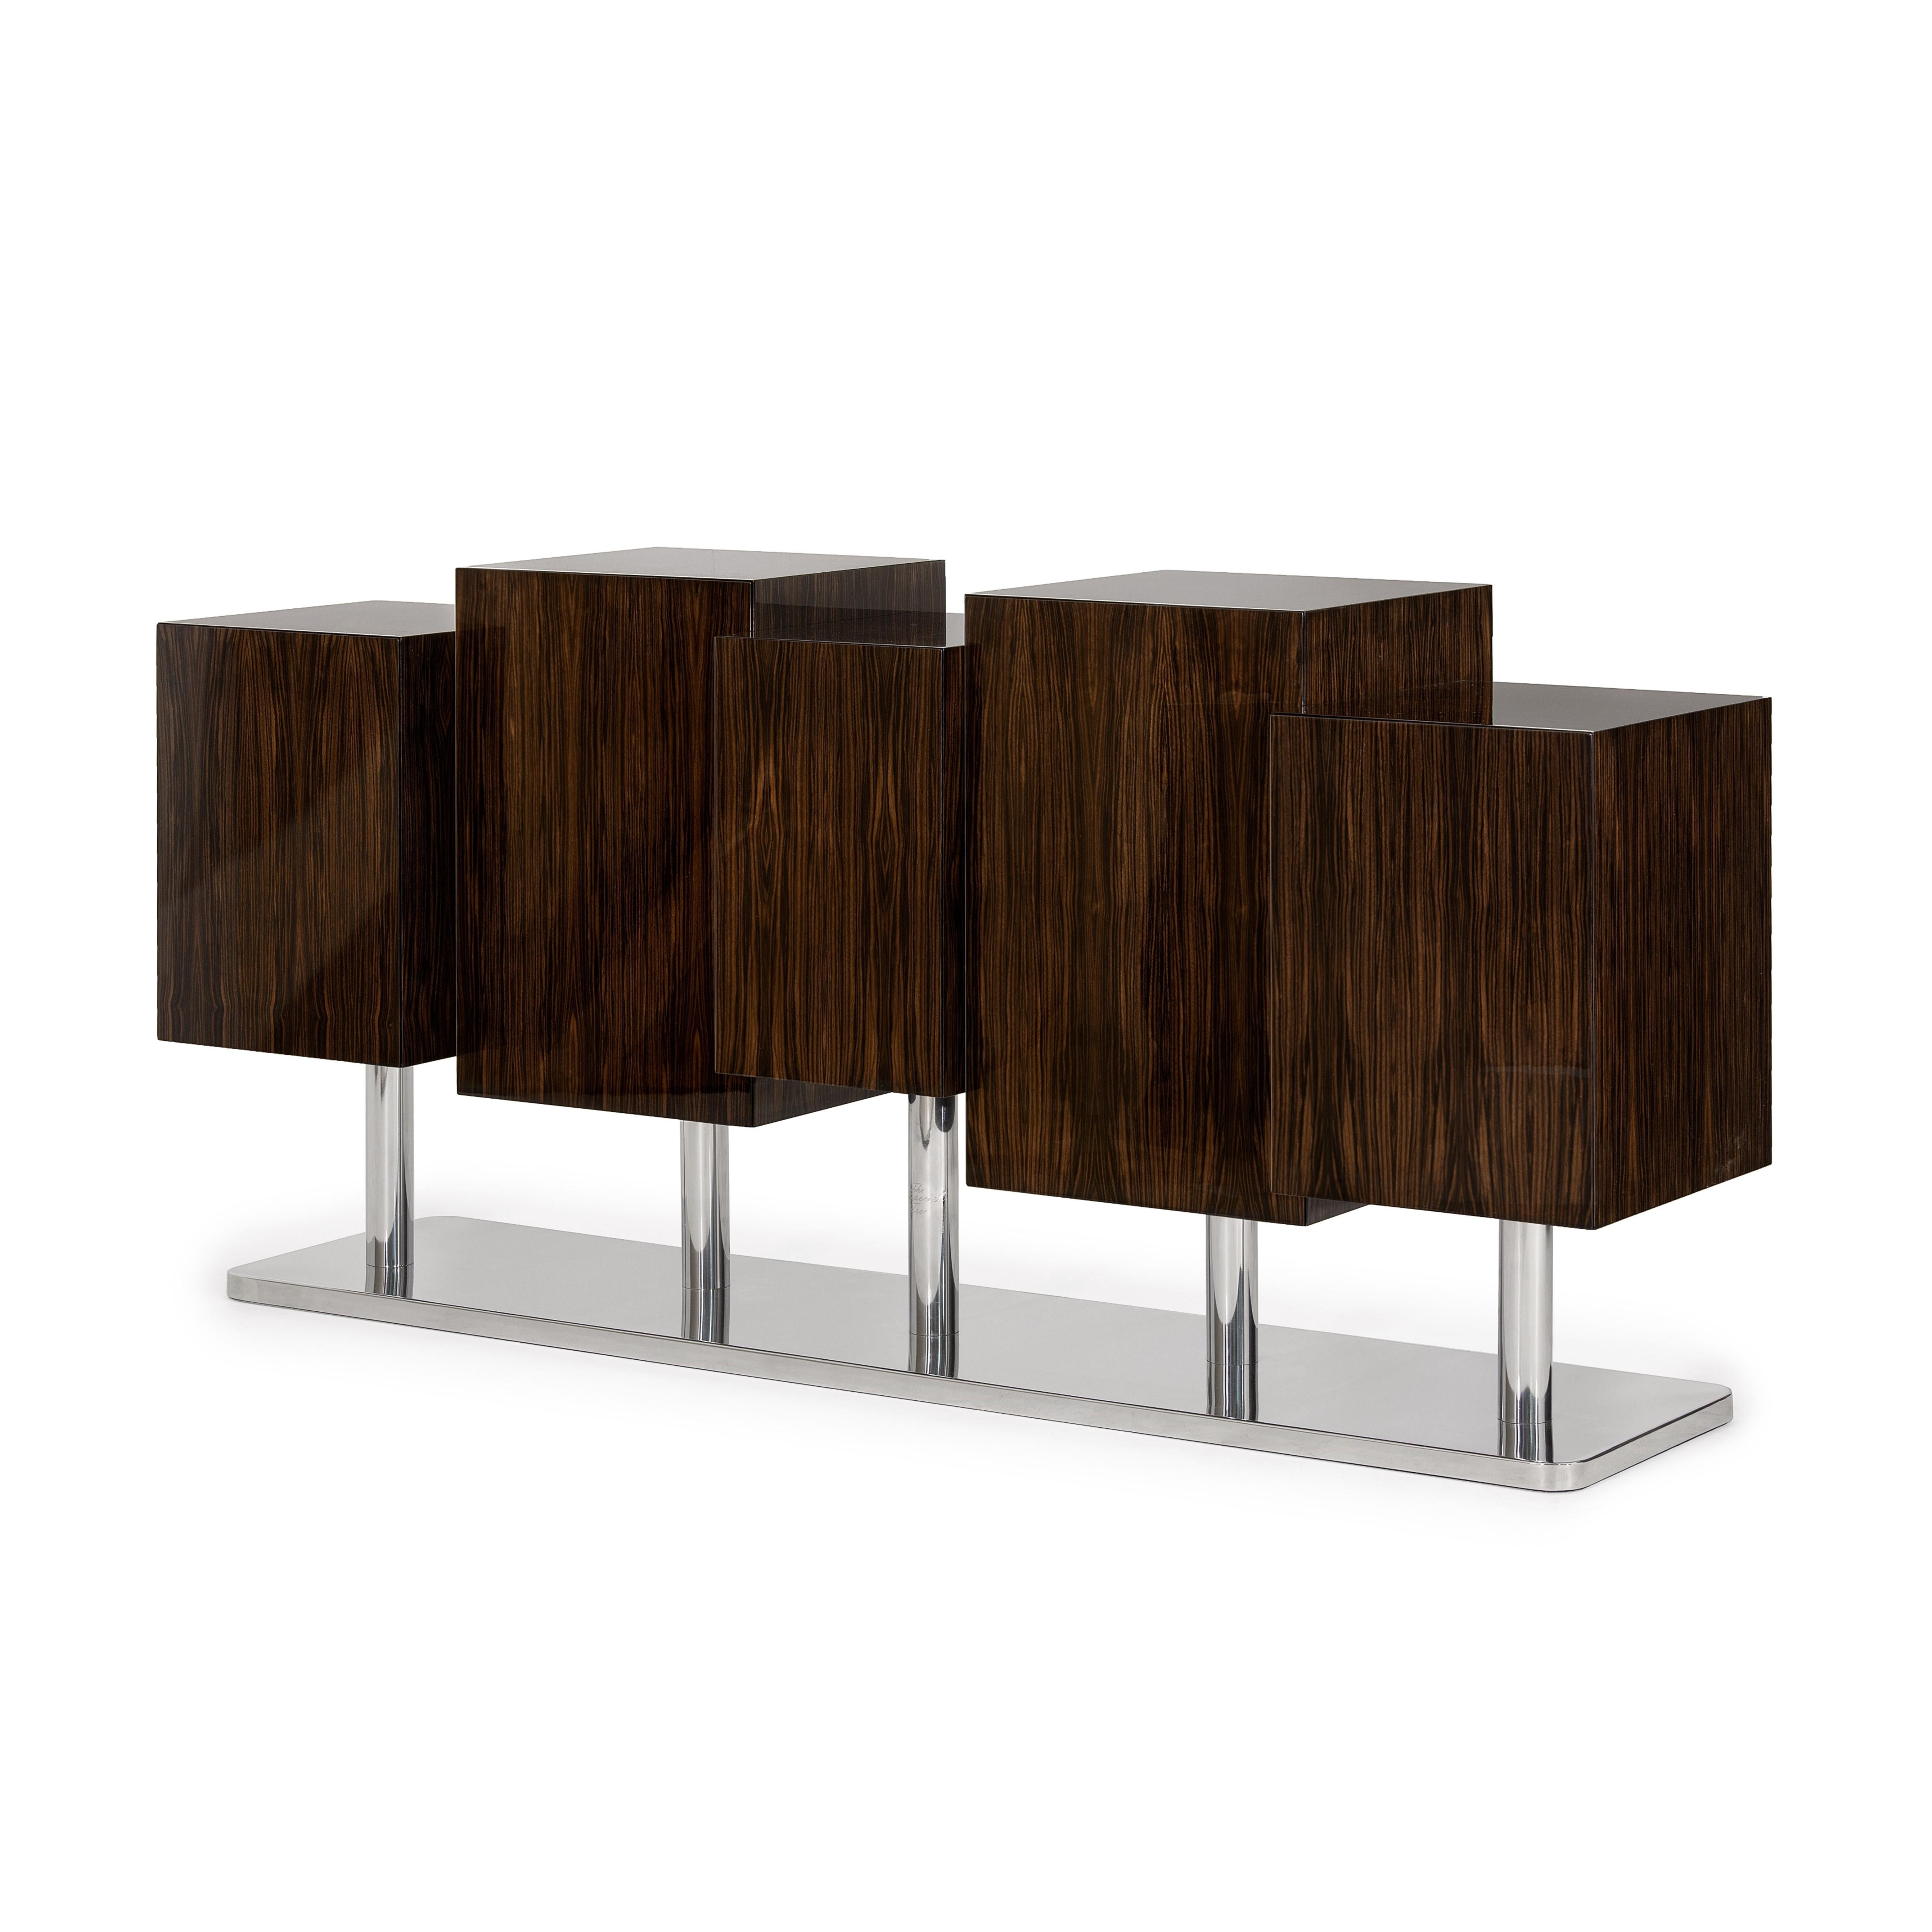 The special tree is a tree in which two lovers write the promise of an everlasting love.
The special tree sideboard is a redesign of the original cabinet. A singular version of this sideboard is presented in ebony Macassar, showing the geometric